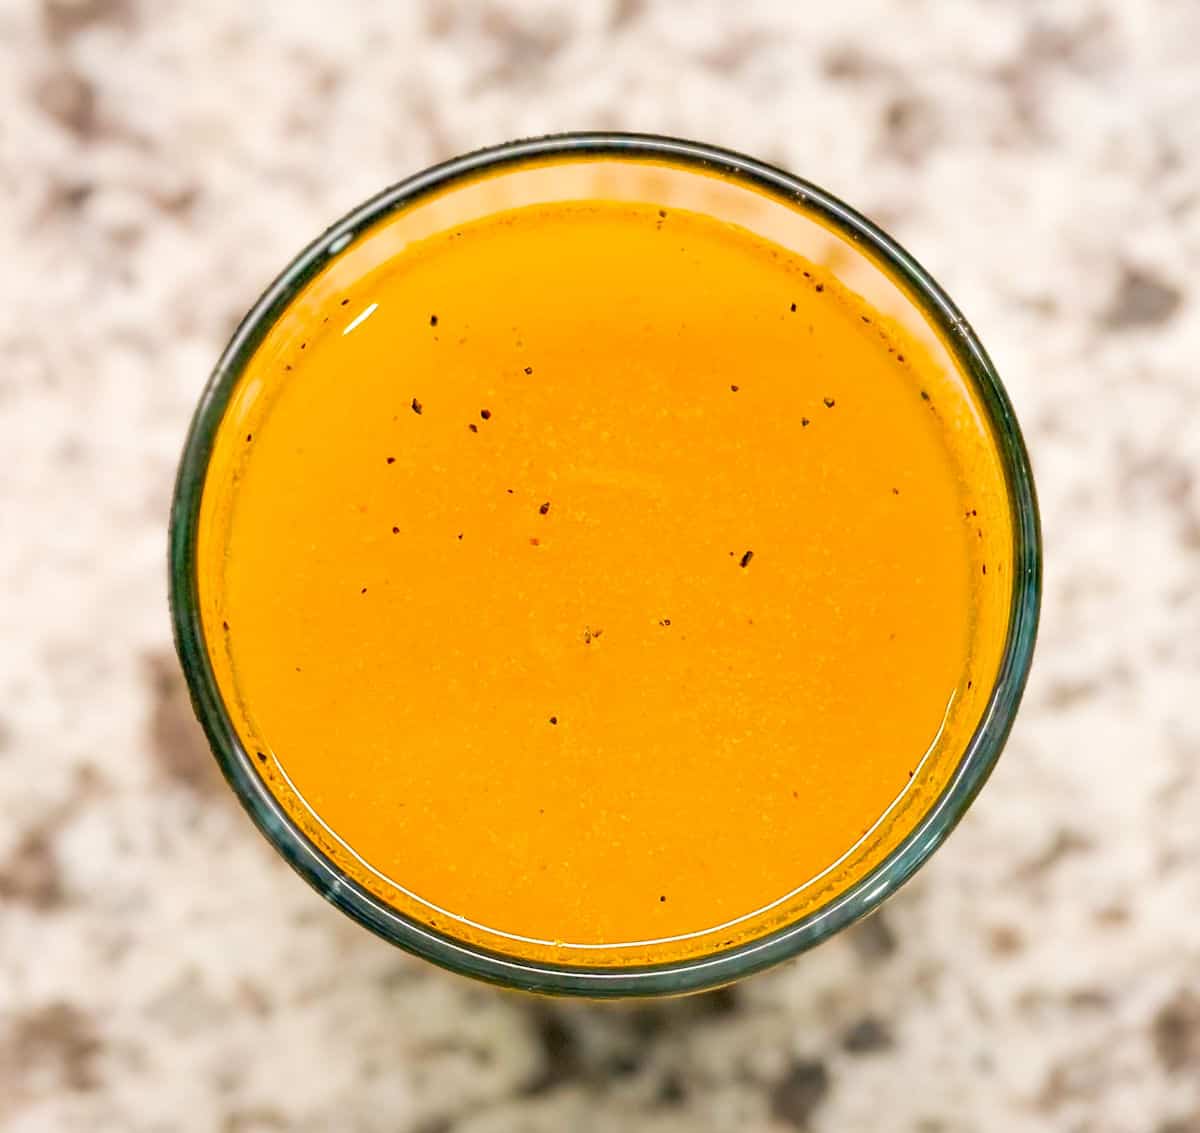 a birdseye view of the glass of turmeric lemon juice after adding water to the mixture. a few specs of black pepper float in the orange drink.